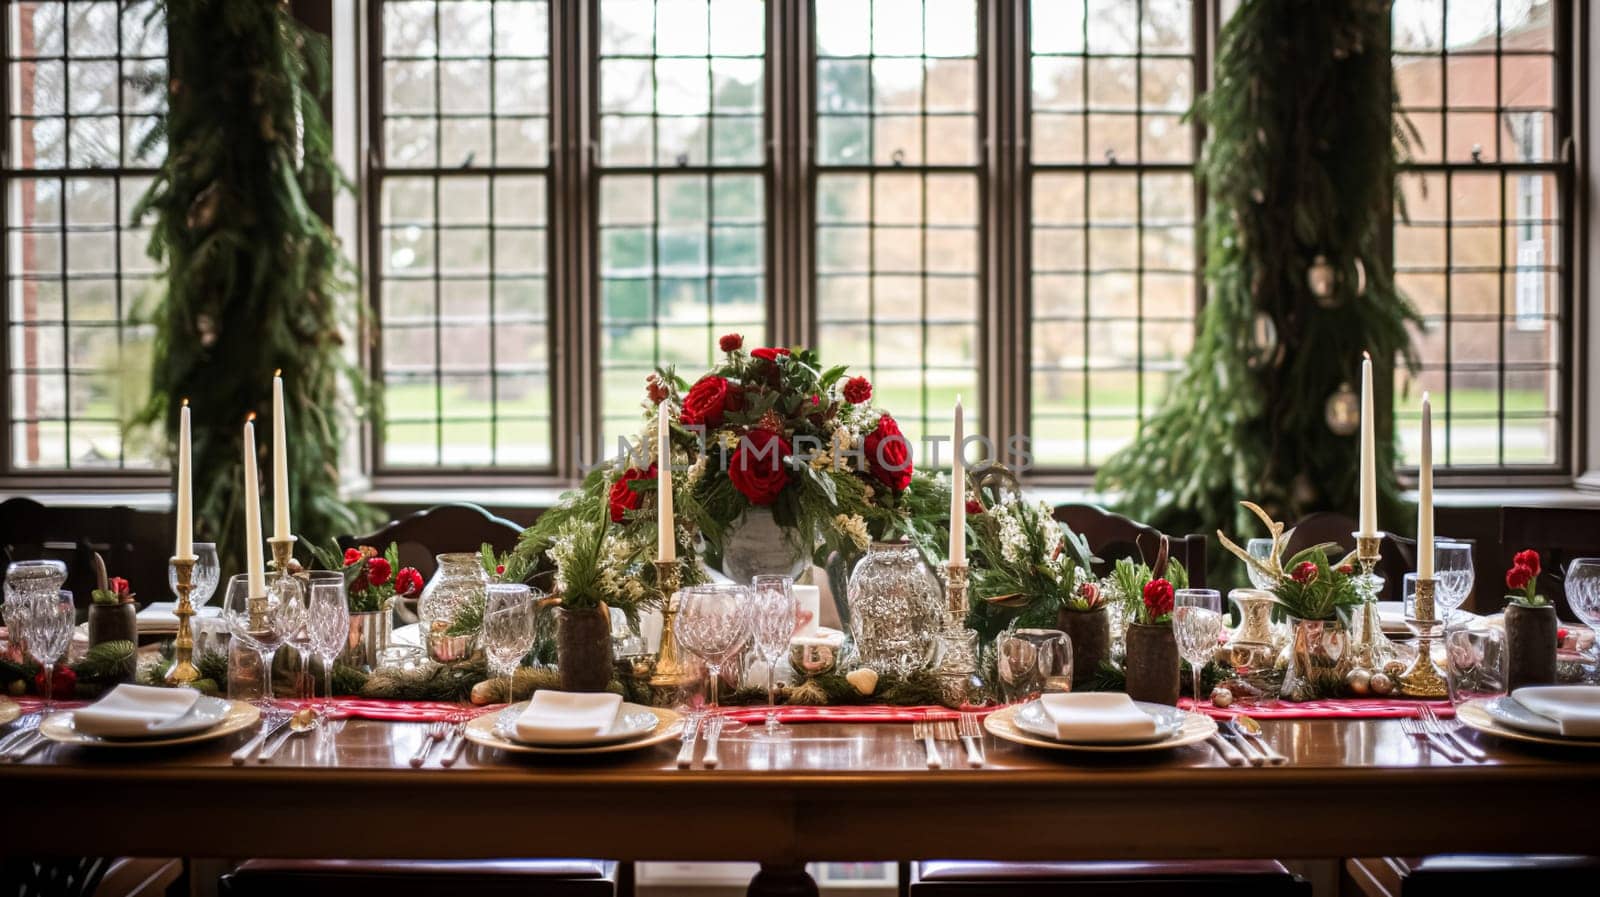 Christmas at the manor, holiday tablescape and dinner table setting, English countryside decoration and interior decor by Anneleven